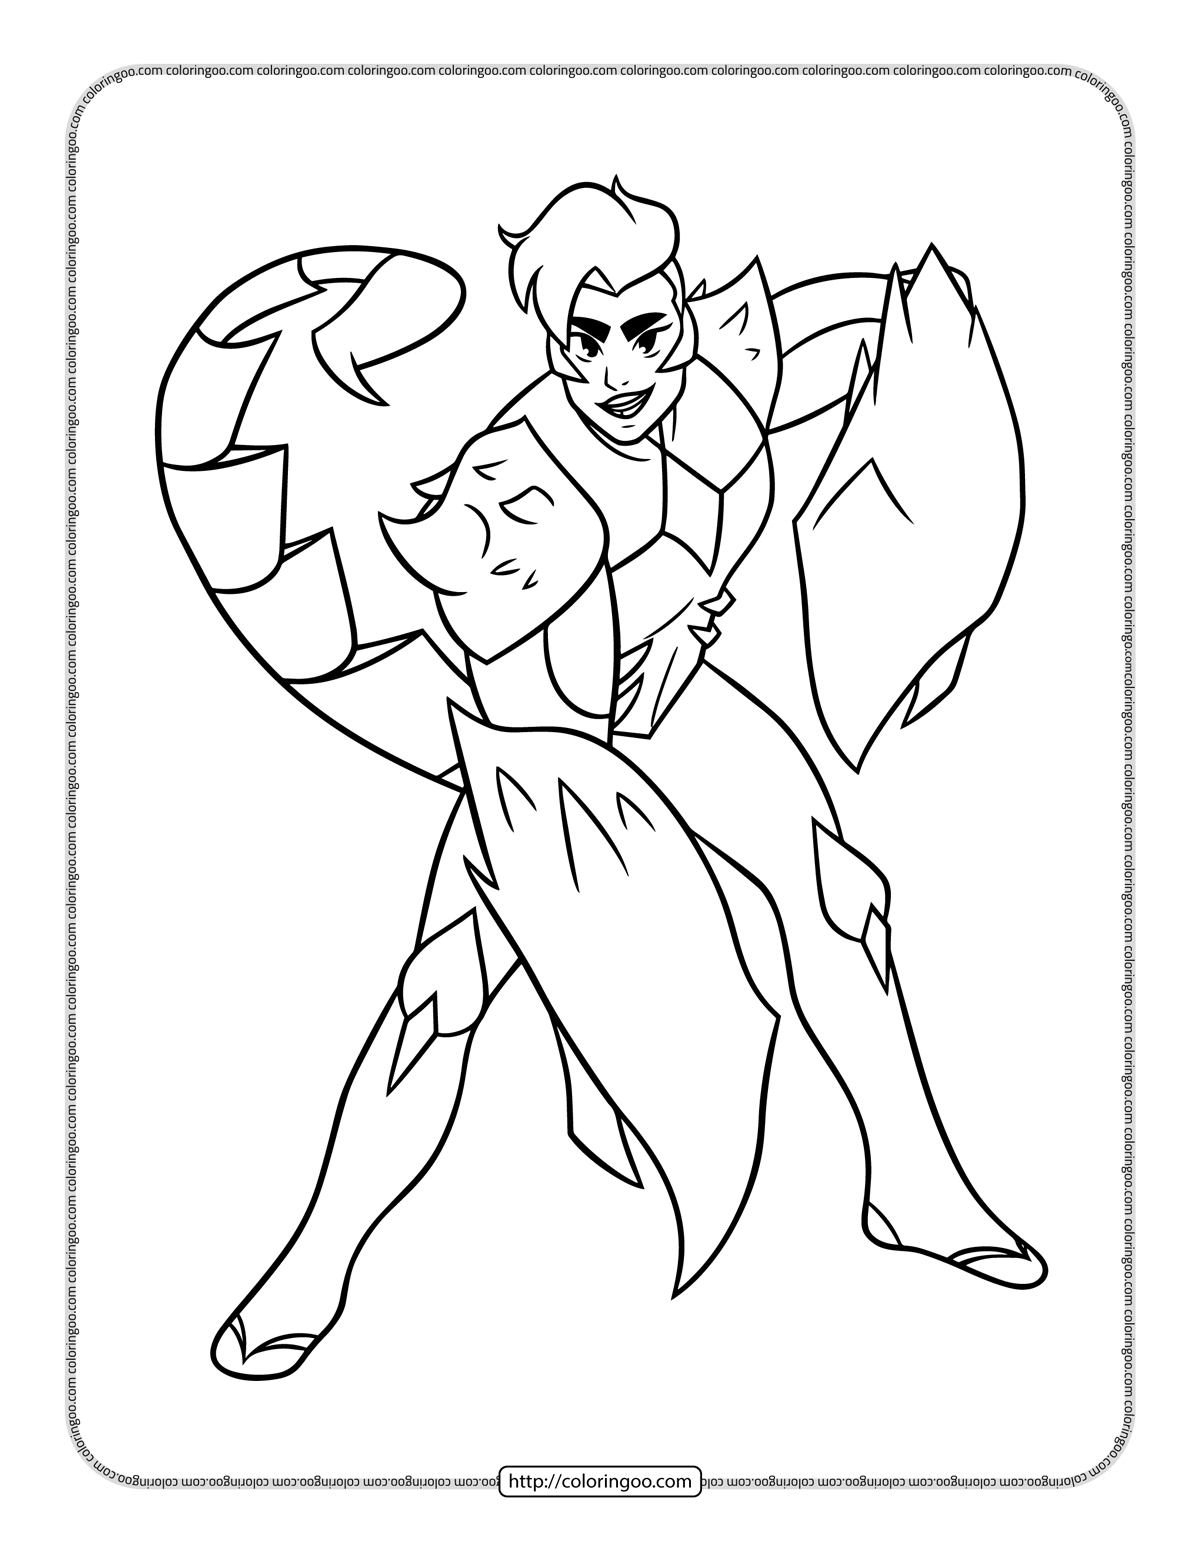 scorpia from she ra coloring pages